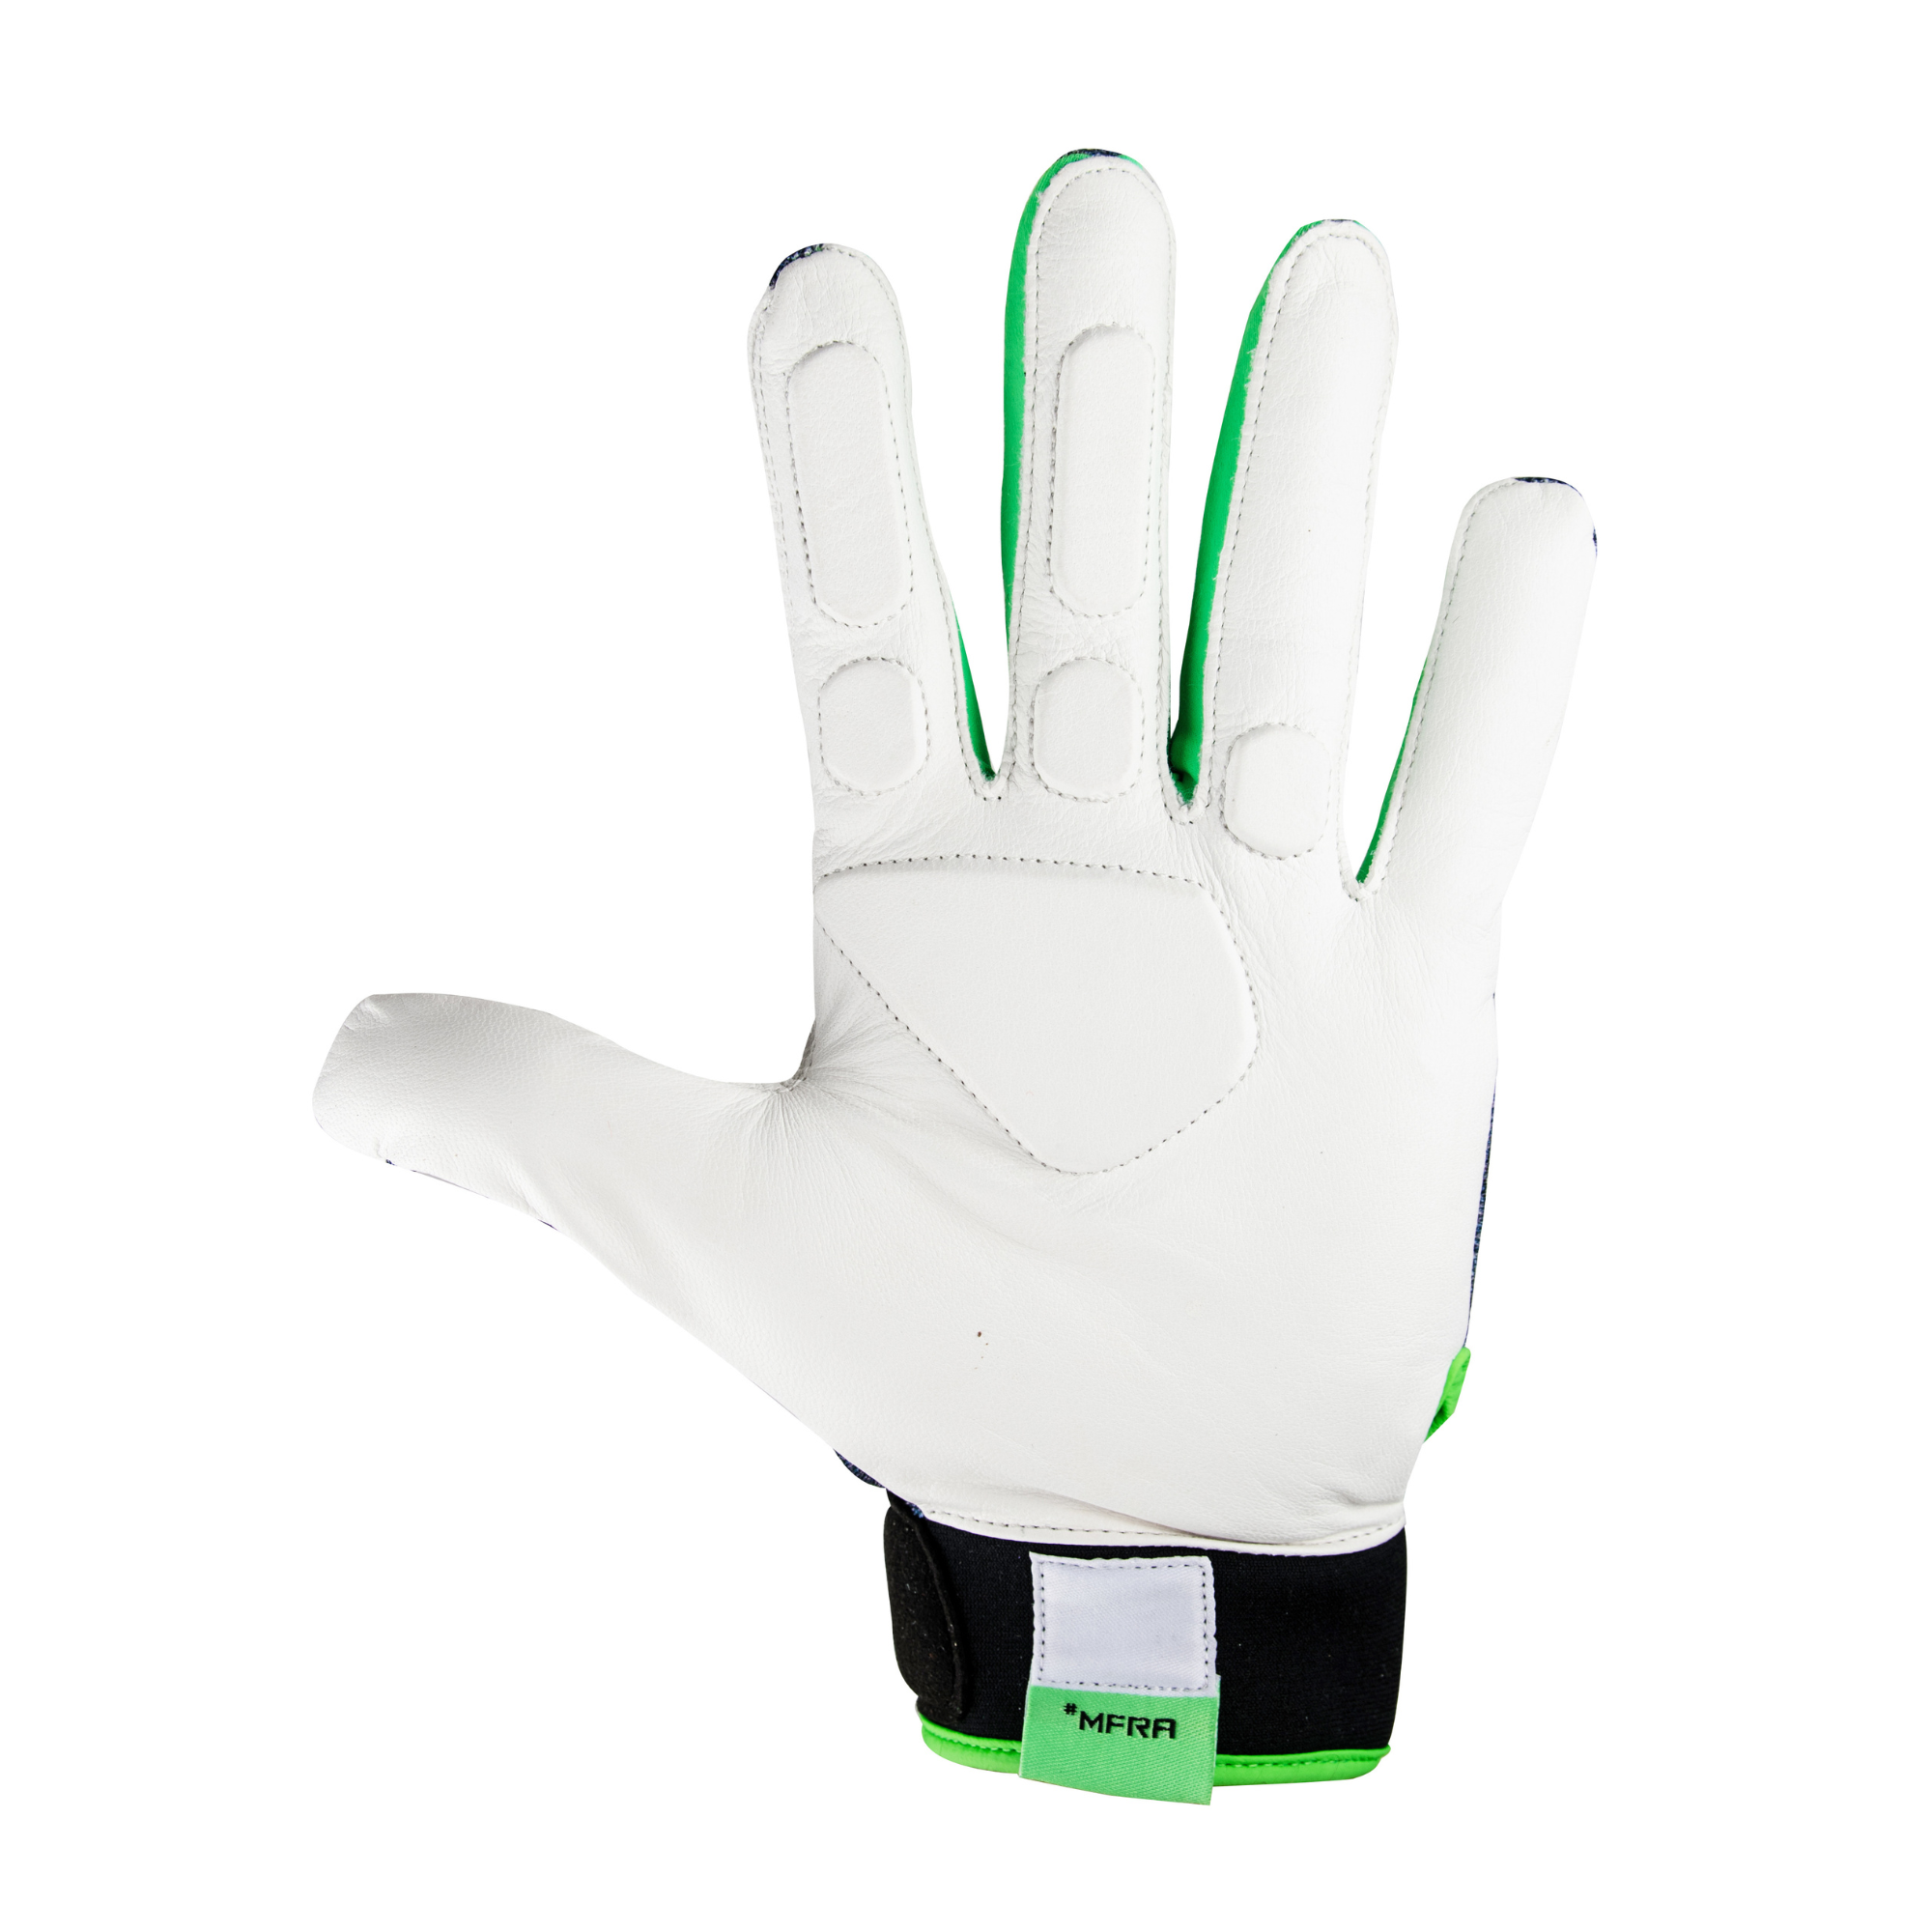 All-Star  Adult Protective Catcher's Inner Glove - Fingers Only